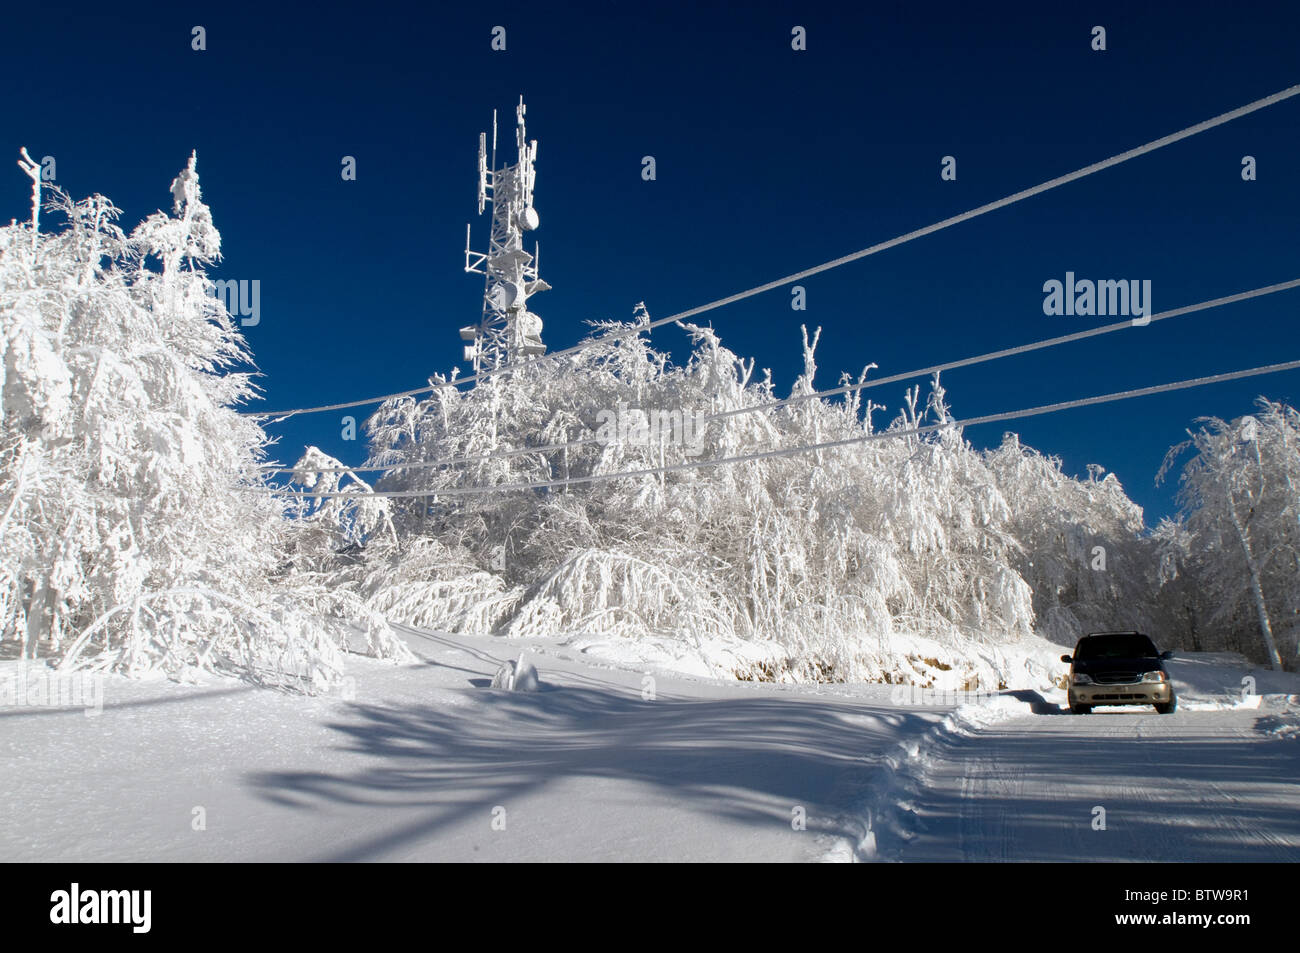 Aftermath of an ice-storm on Mount Shefford,Quebec. After a snowfall followed by freezing rain left an eerie landscape. Stock Photo